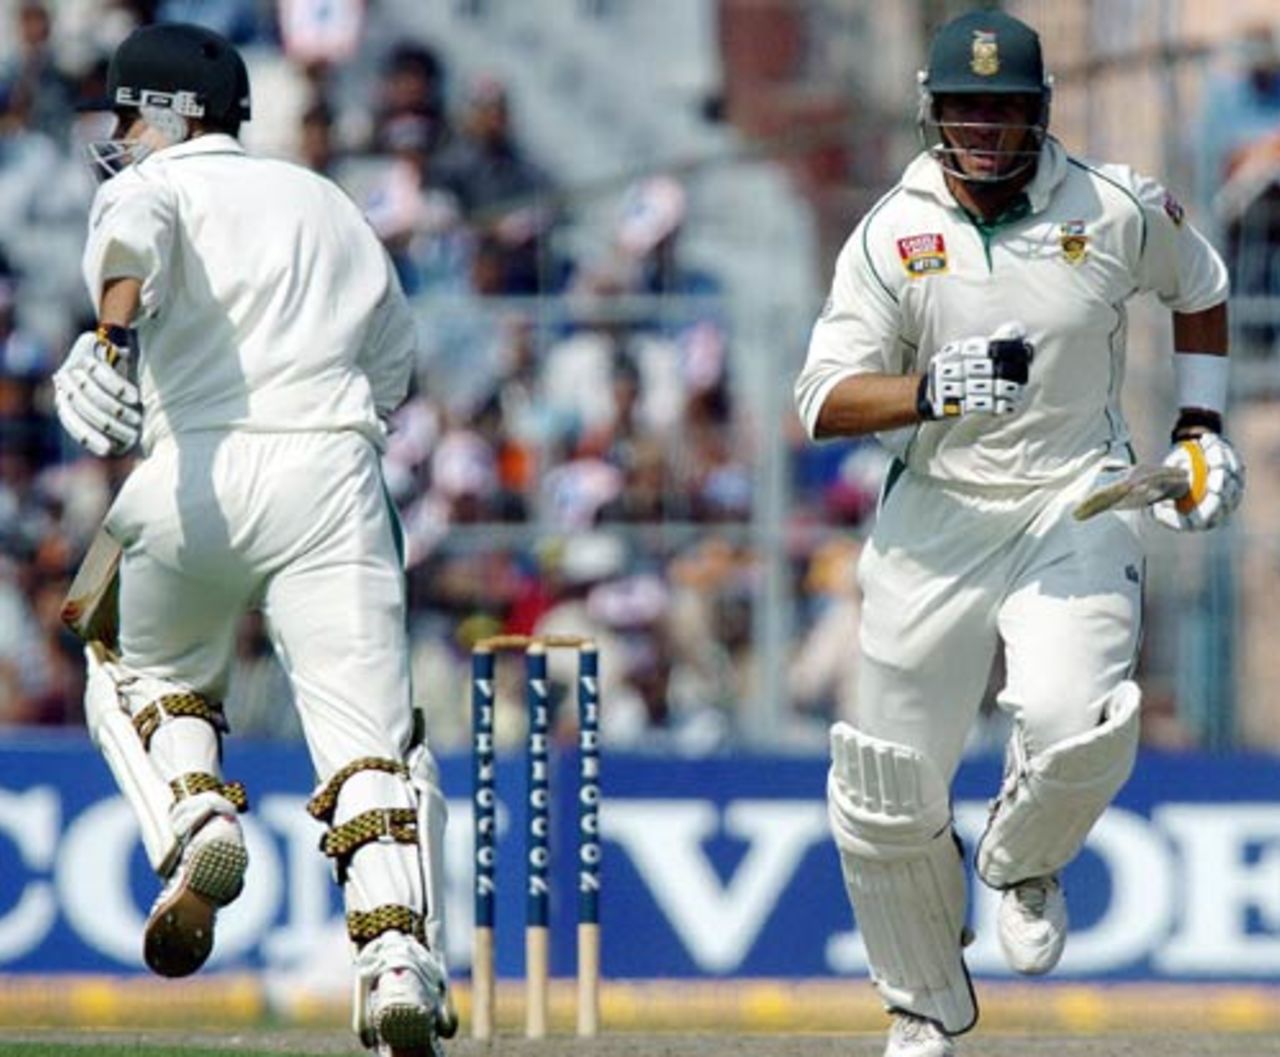 The two Jacques, Kallis and Rudolph, steal a run during their 109-run partnership on the first day of the Kolkata Test against India, November 28, 2004